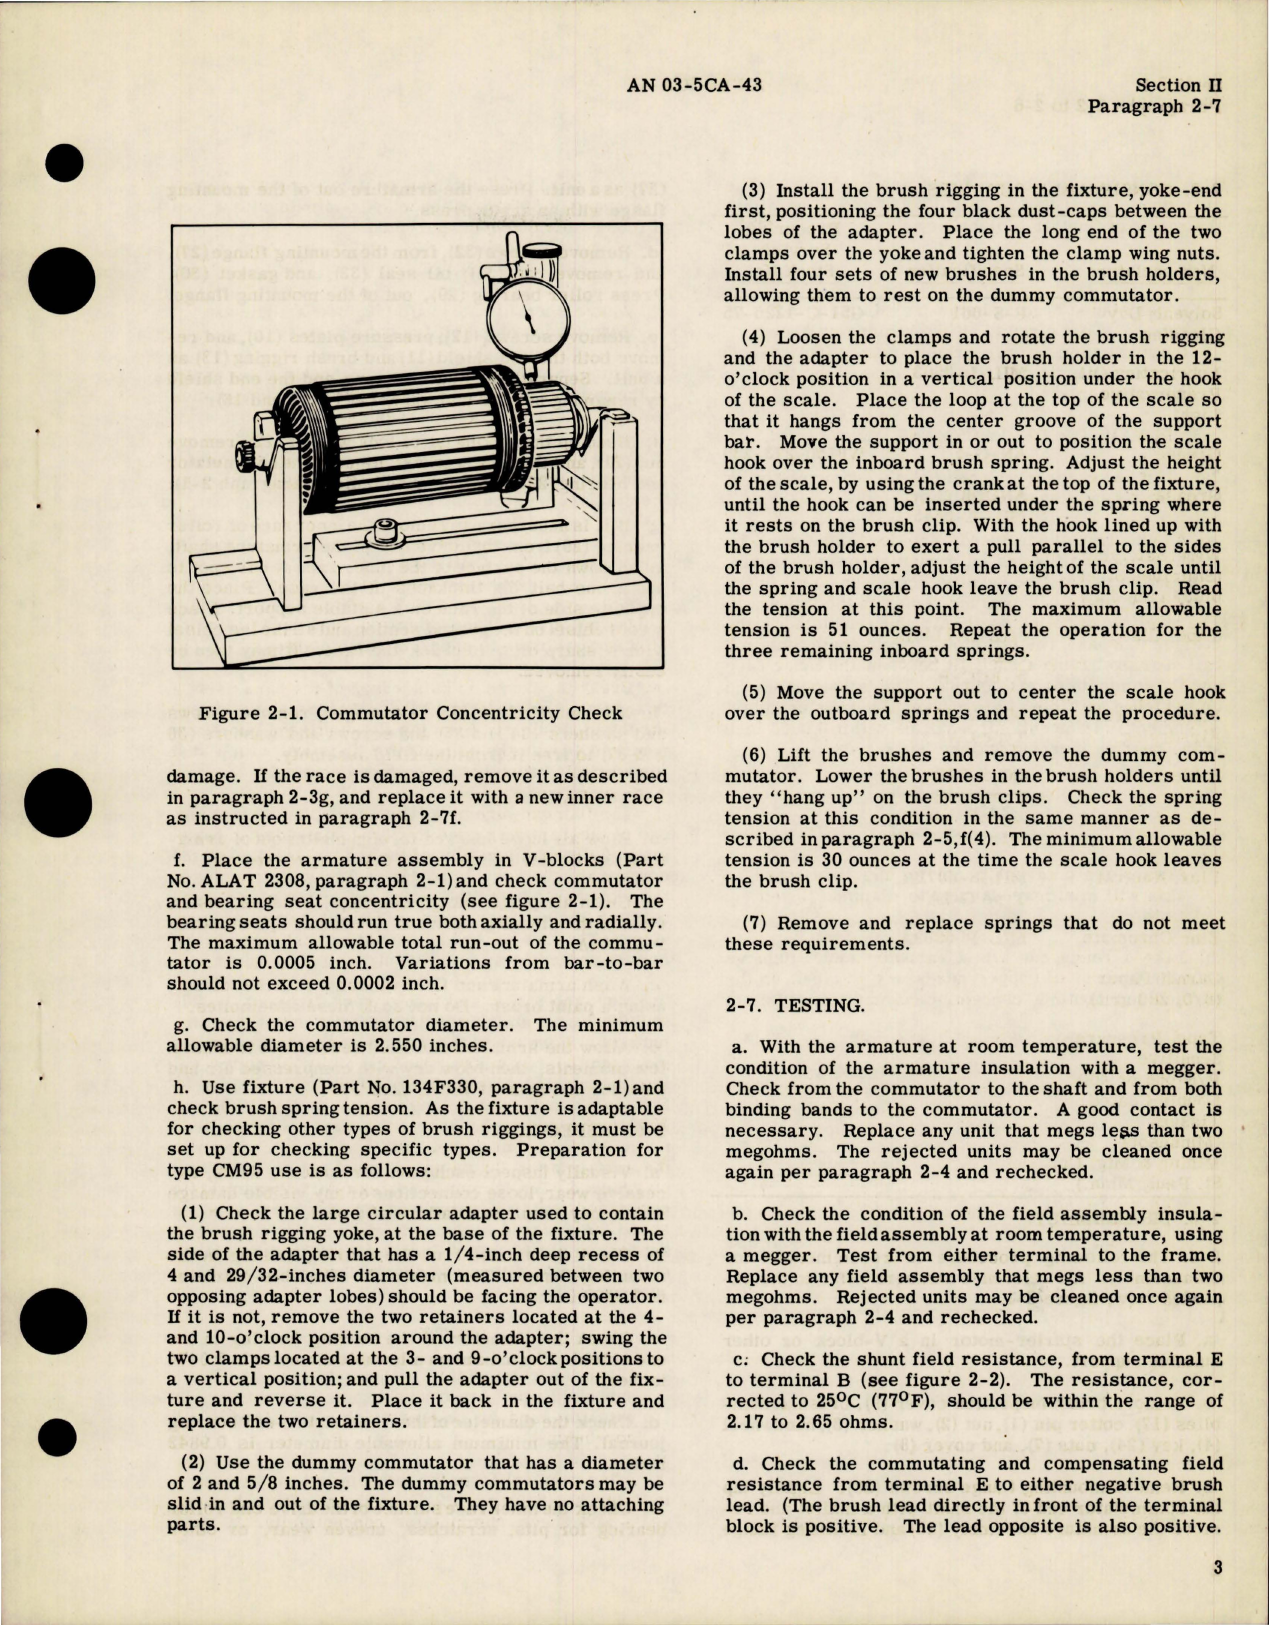 Sample page 7 from AirCorps Library document: Overhaul Instructions for Starter-Motors - Models 2CM95B13, 2CM95B18, 2CM95B19 